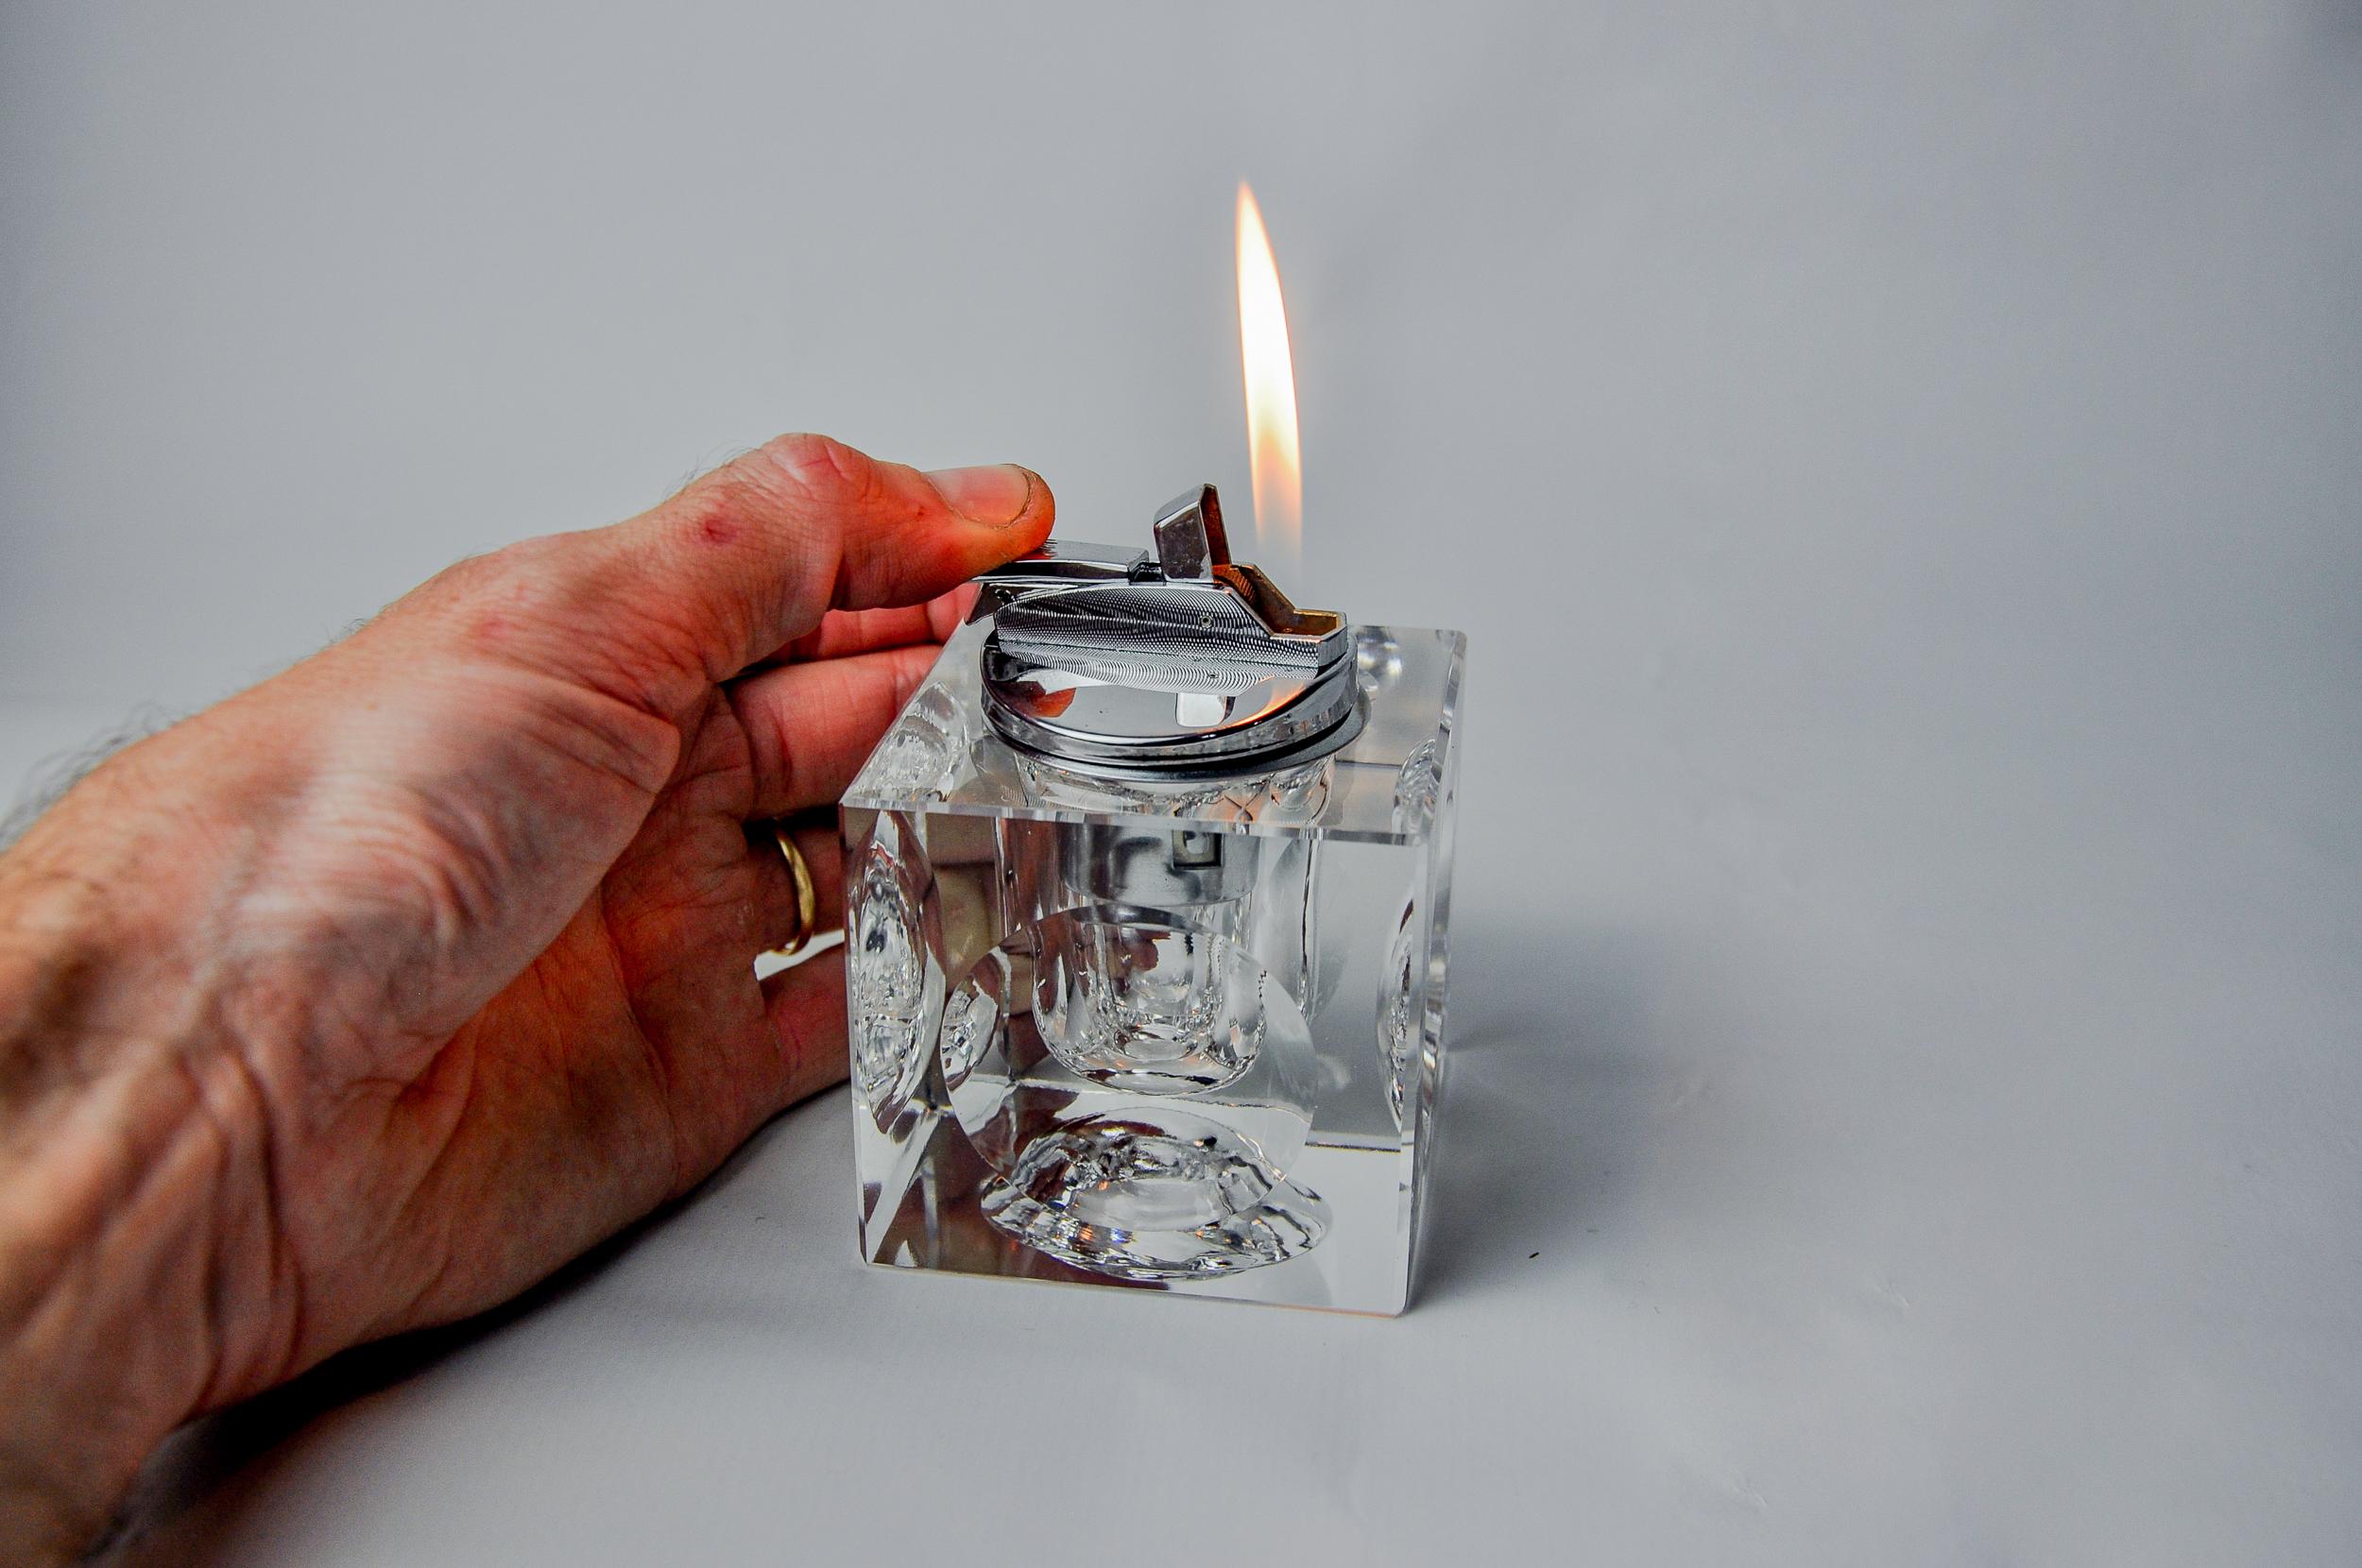 Superb ice lighter designed and produced by antonio imperatore in italy in the 1970s. Lighter in transparent murano glass with a magnifying effect on its facets, handcrafted by venetian master glassmakers. Decorative object that will bring a real